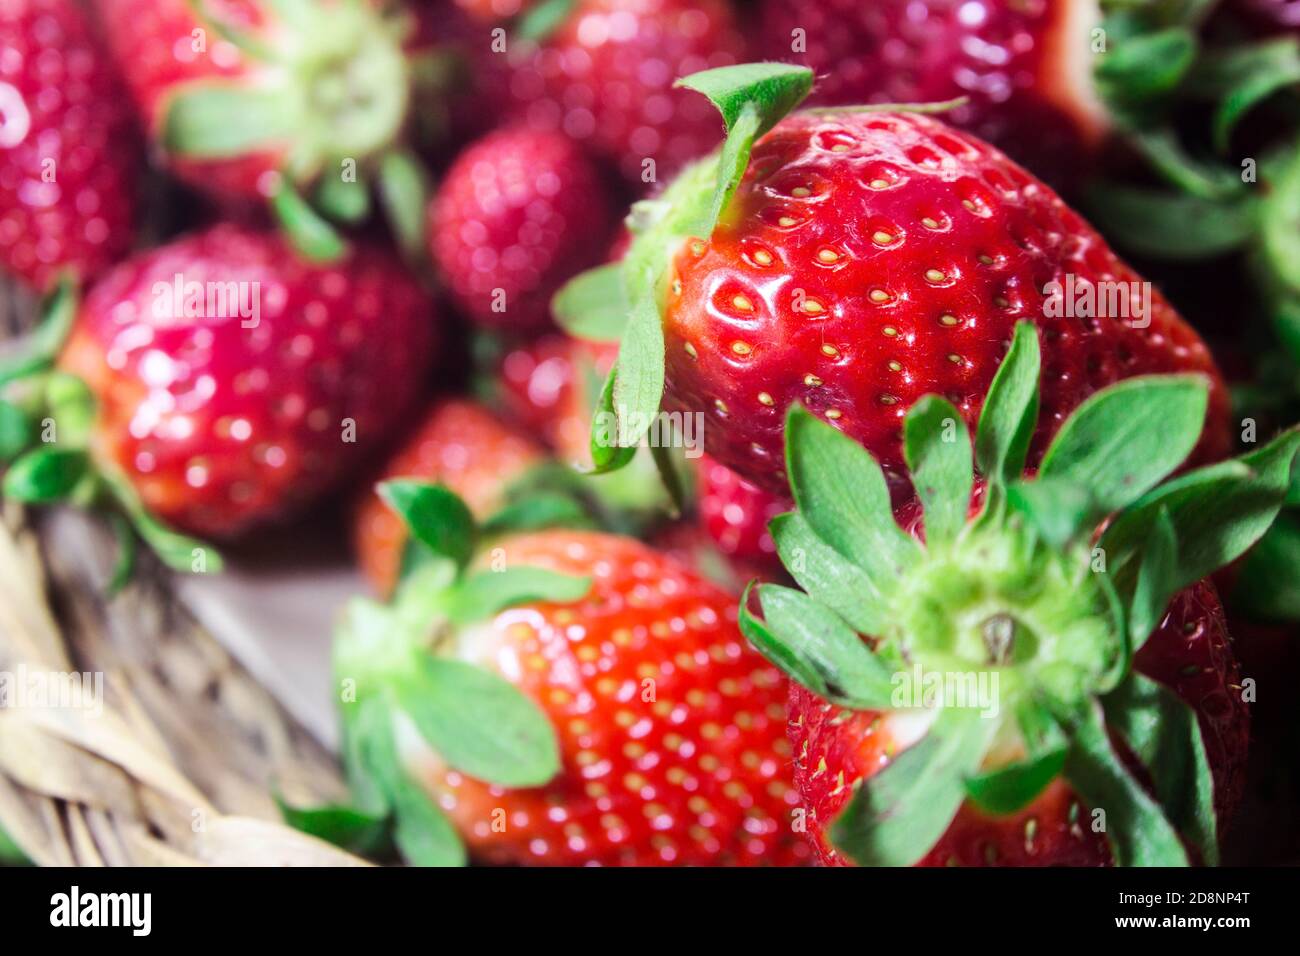 Some fresh strawberries with green sepals still attached. Example of complementary colors red - green Stock Photo